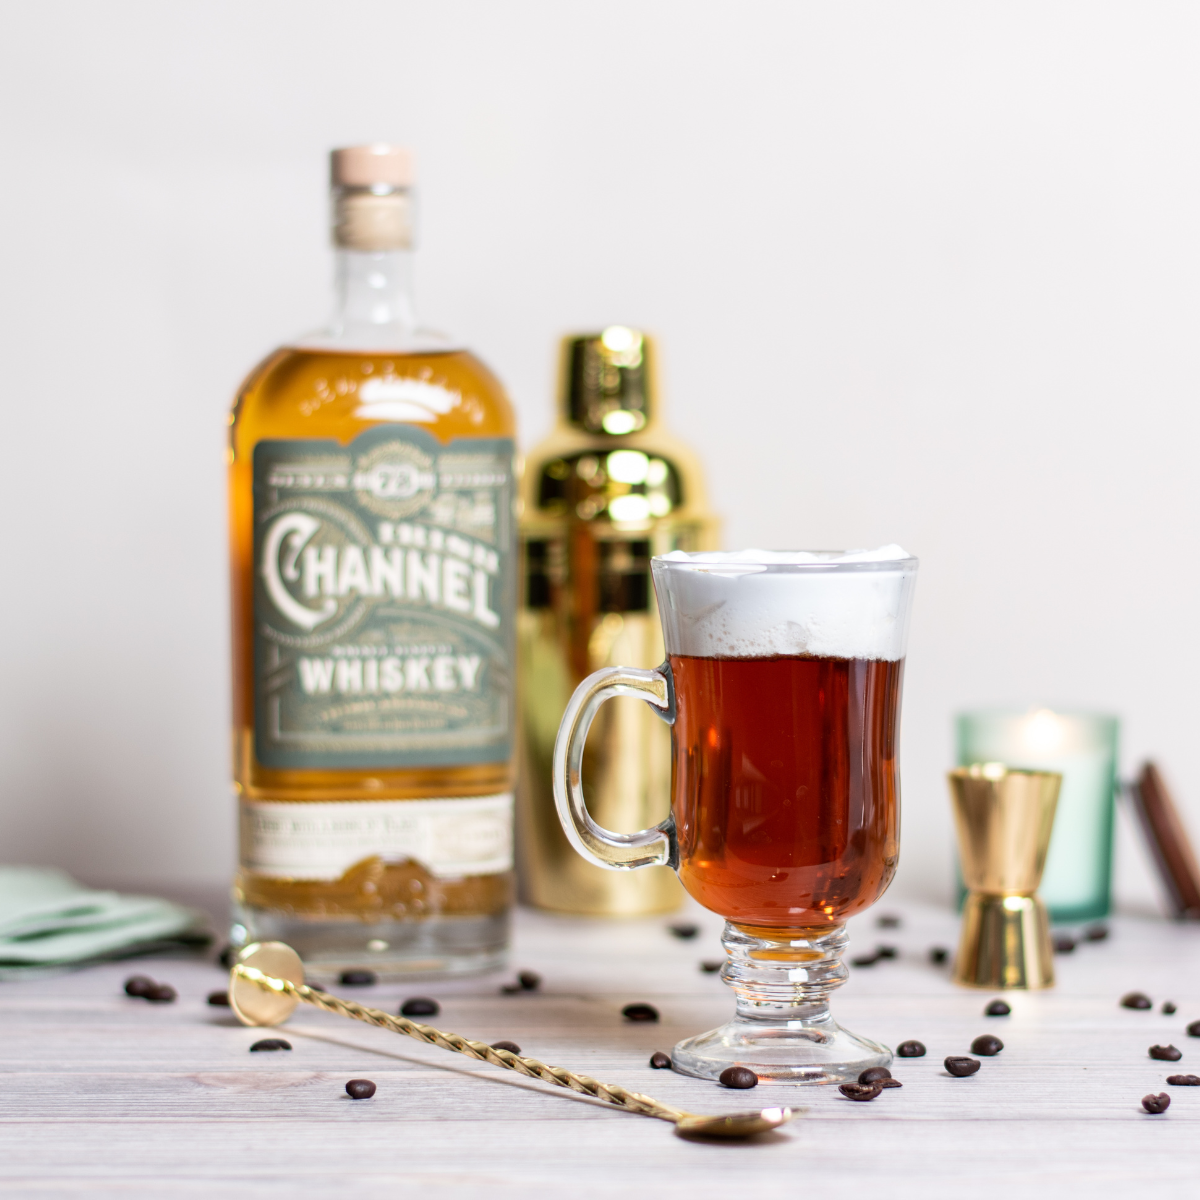 St Patrick's Day Spiked Irish Coffee with the Instant Solo Coffee Maker, Cheers to St. Patrick's Day! ☘️ #instantpot #instant #stpatricksday  #irishcoffee #coffee #whiskey, By Instant Pot